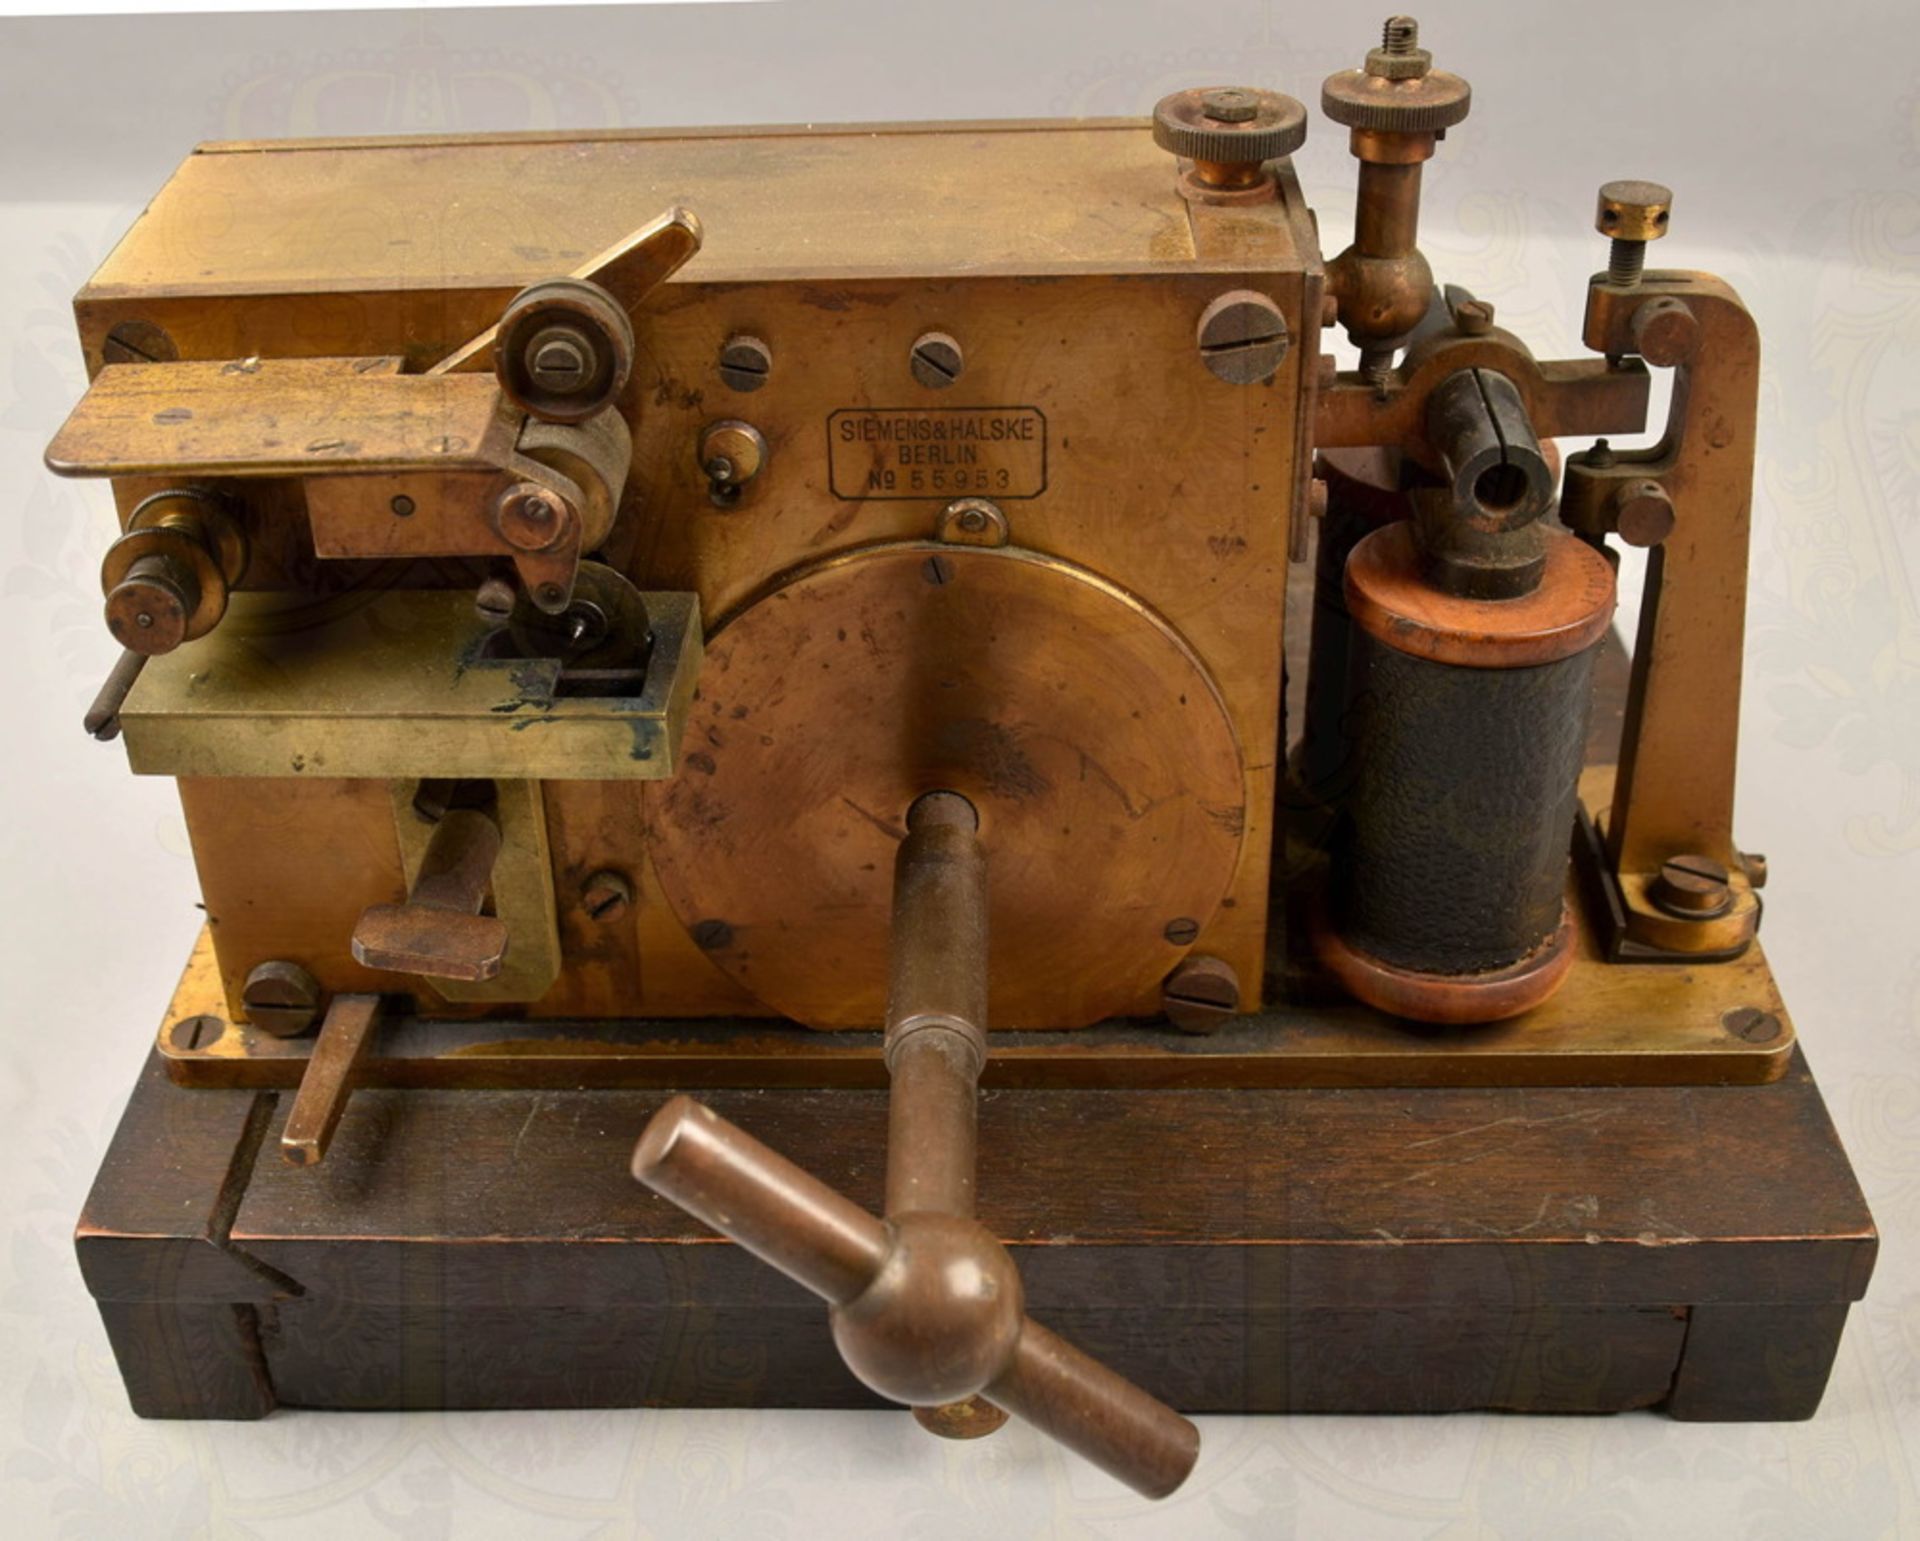 Telegraph equipment made about 1900 - Image 2 of 2